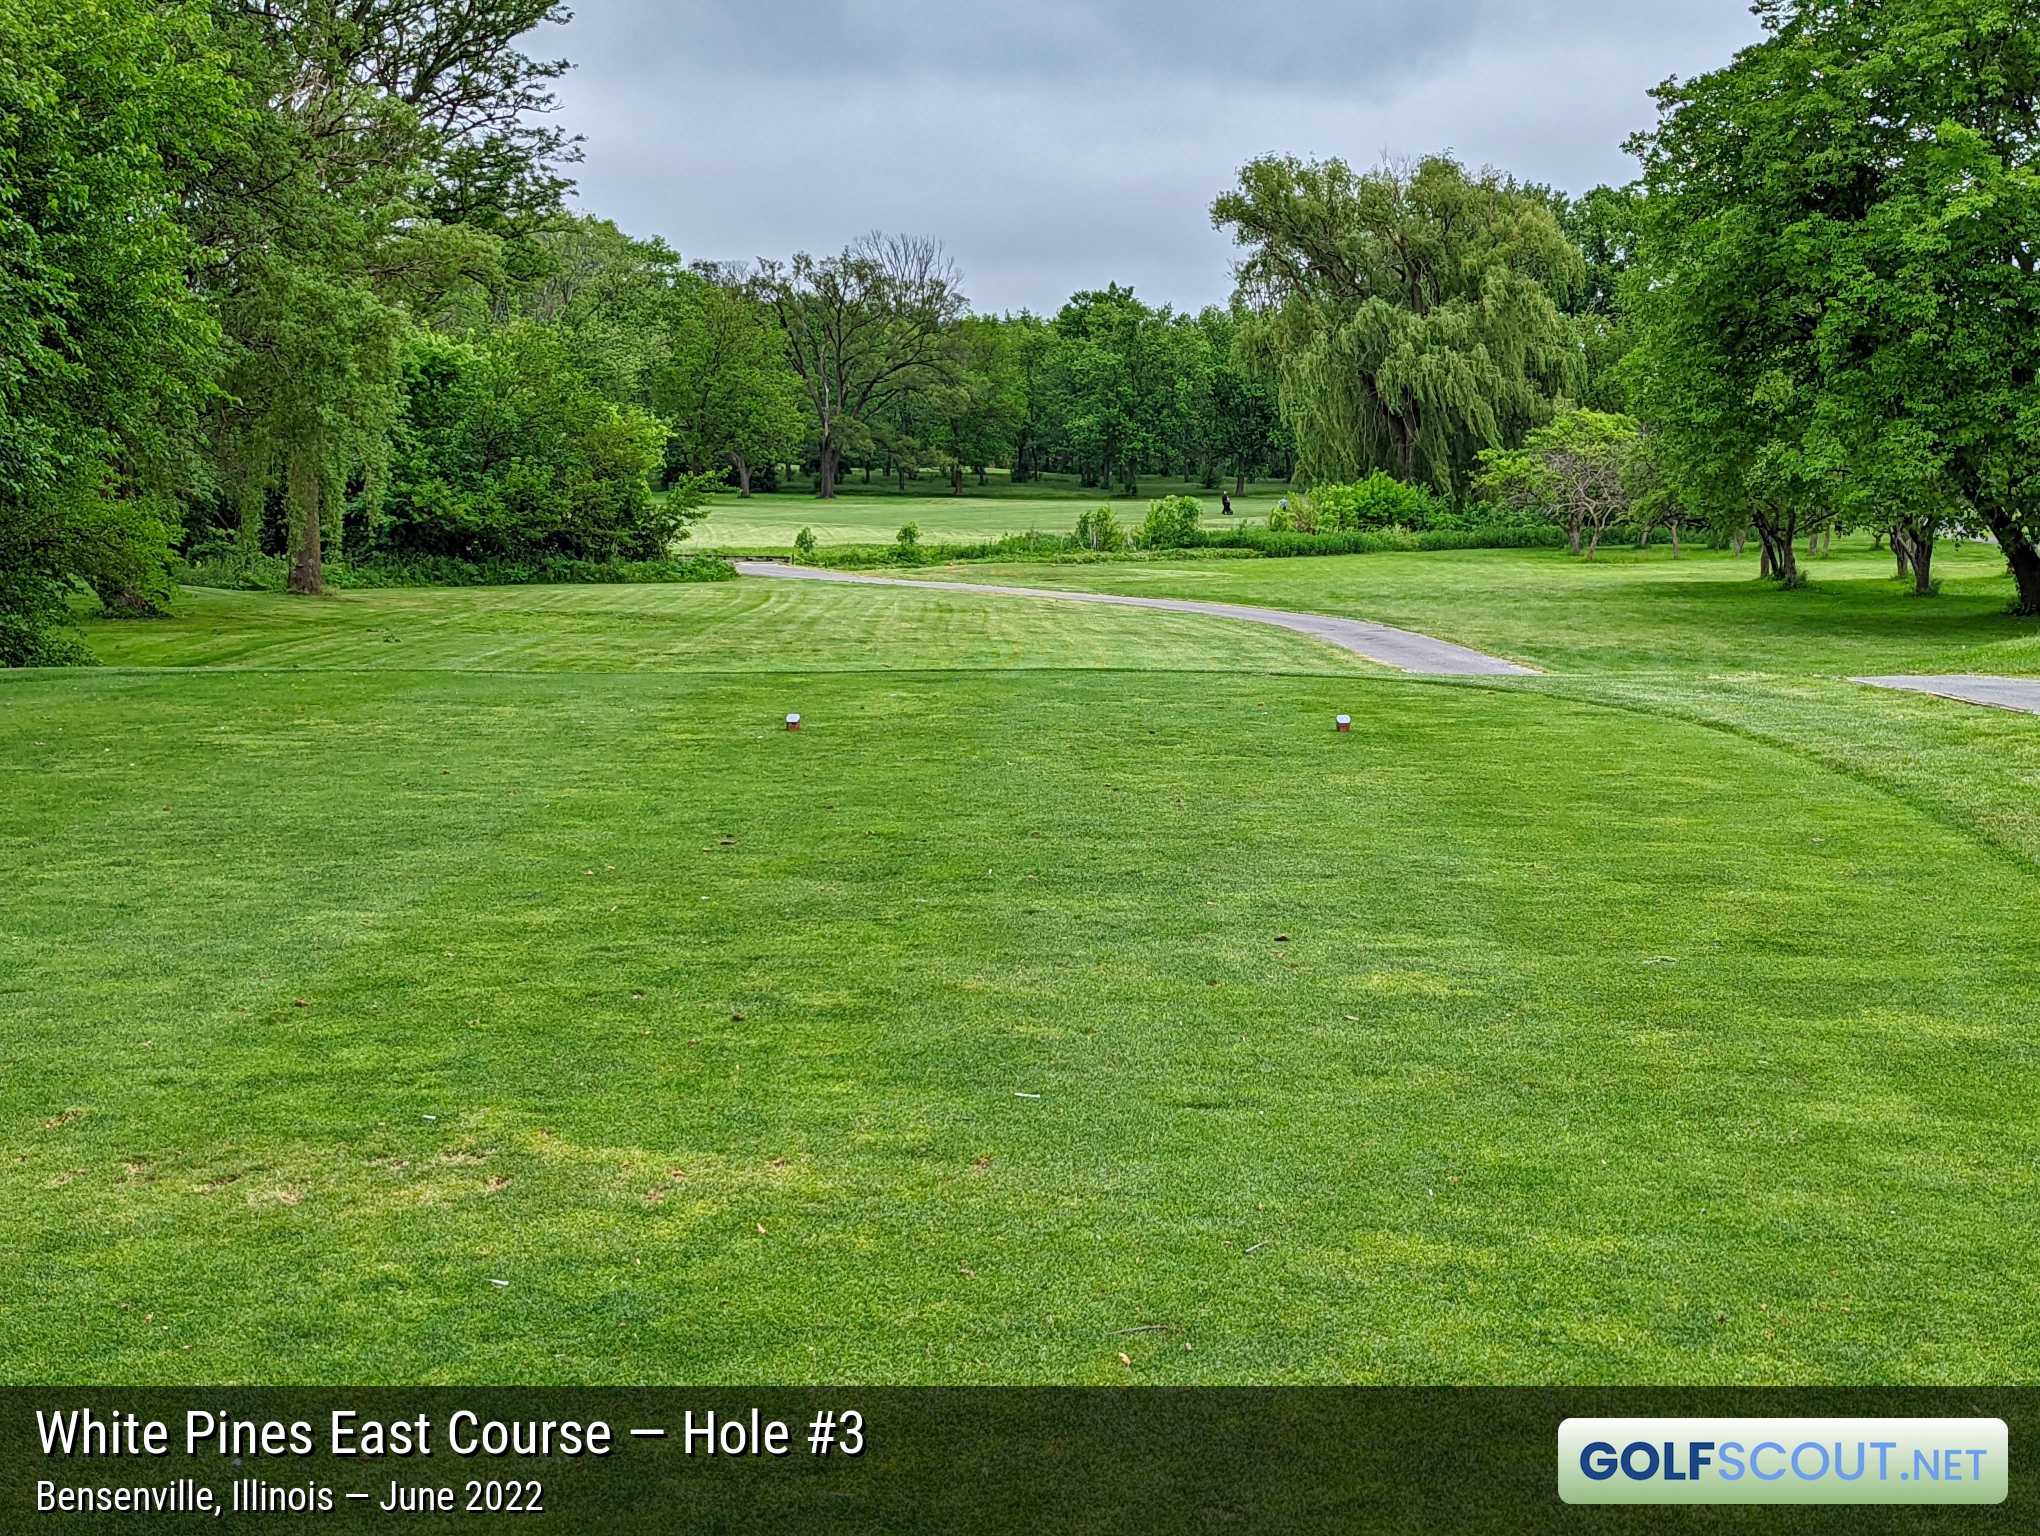 Photo of hole #3 at White Pines East Course in Bensenville, Illinois. 